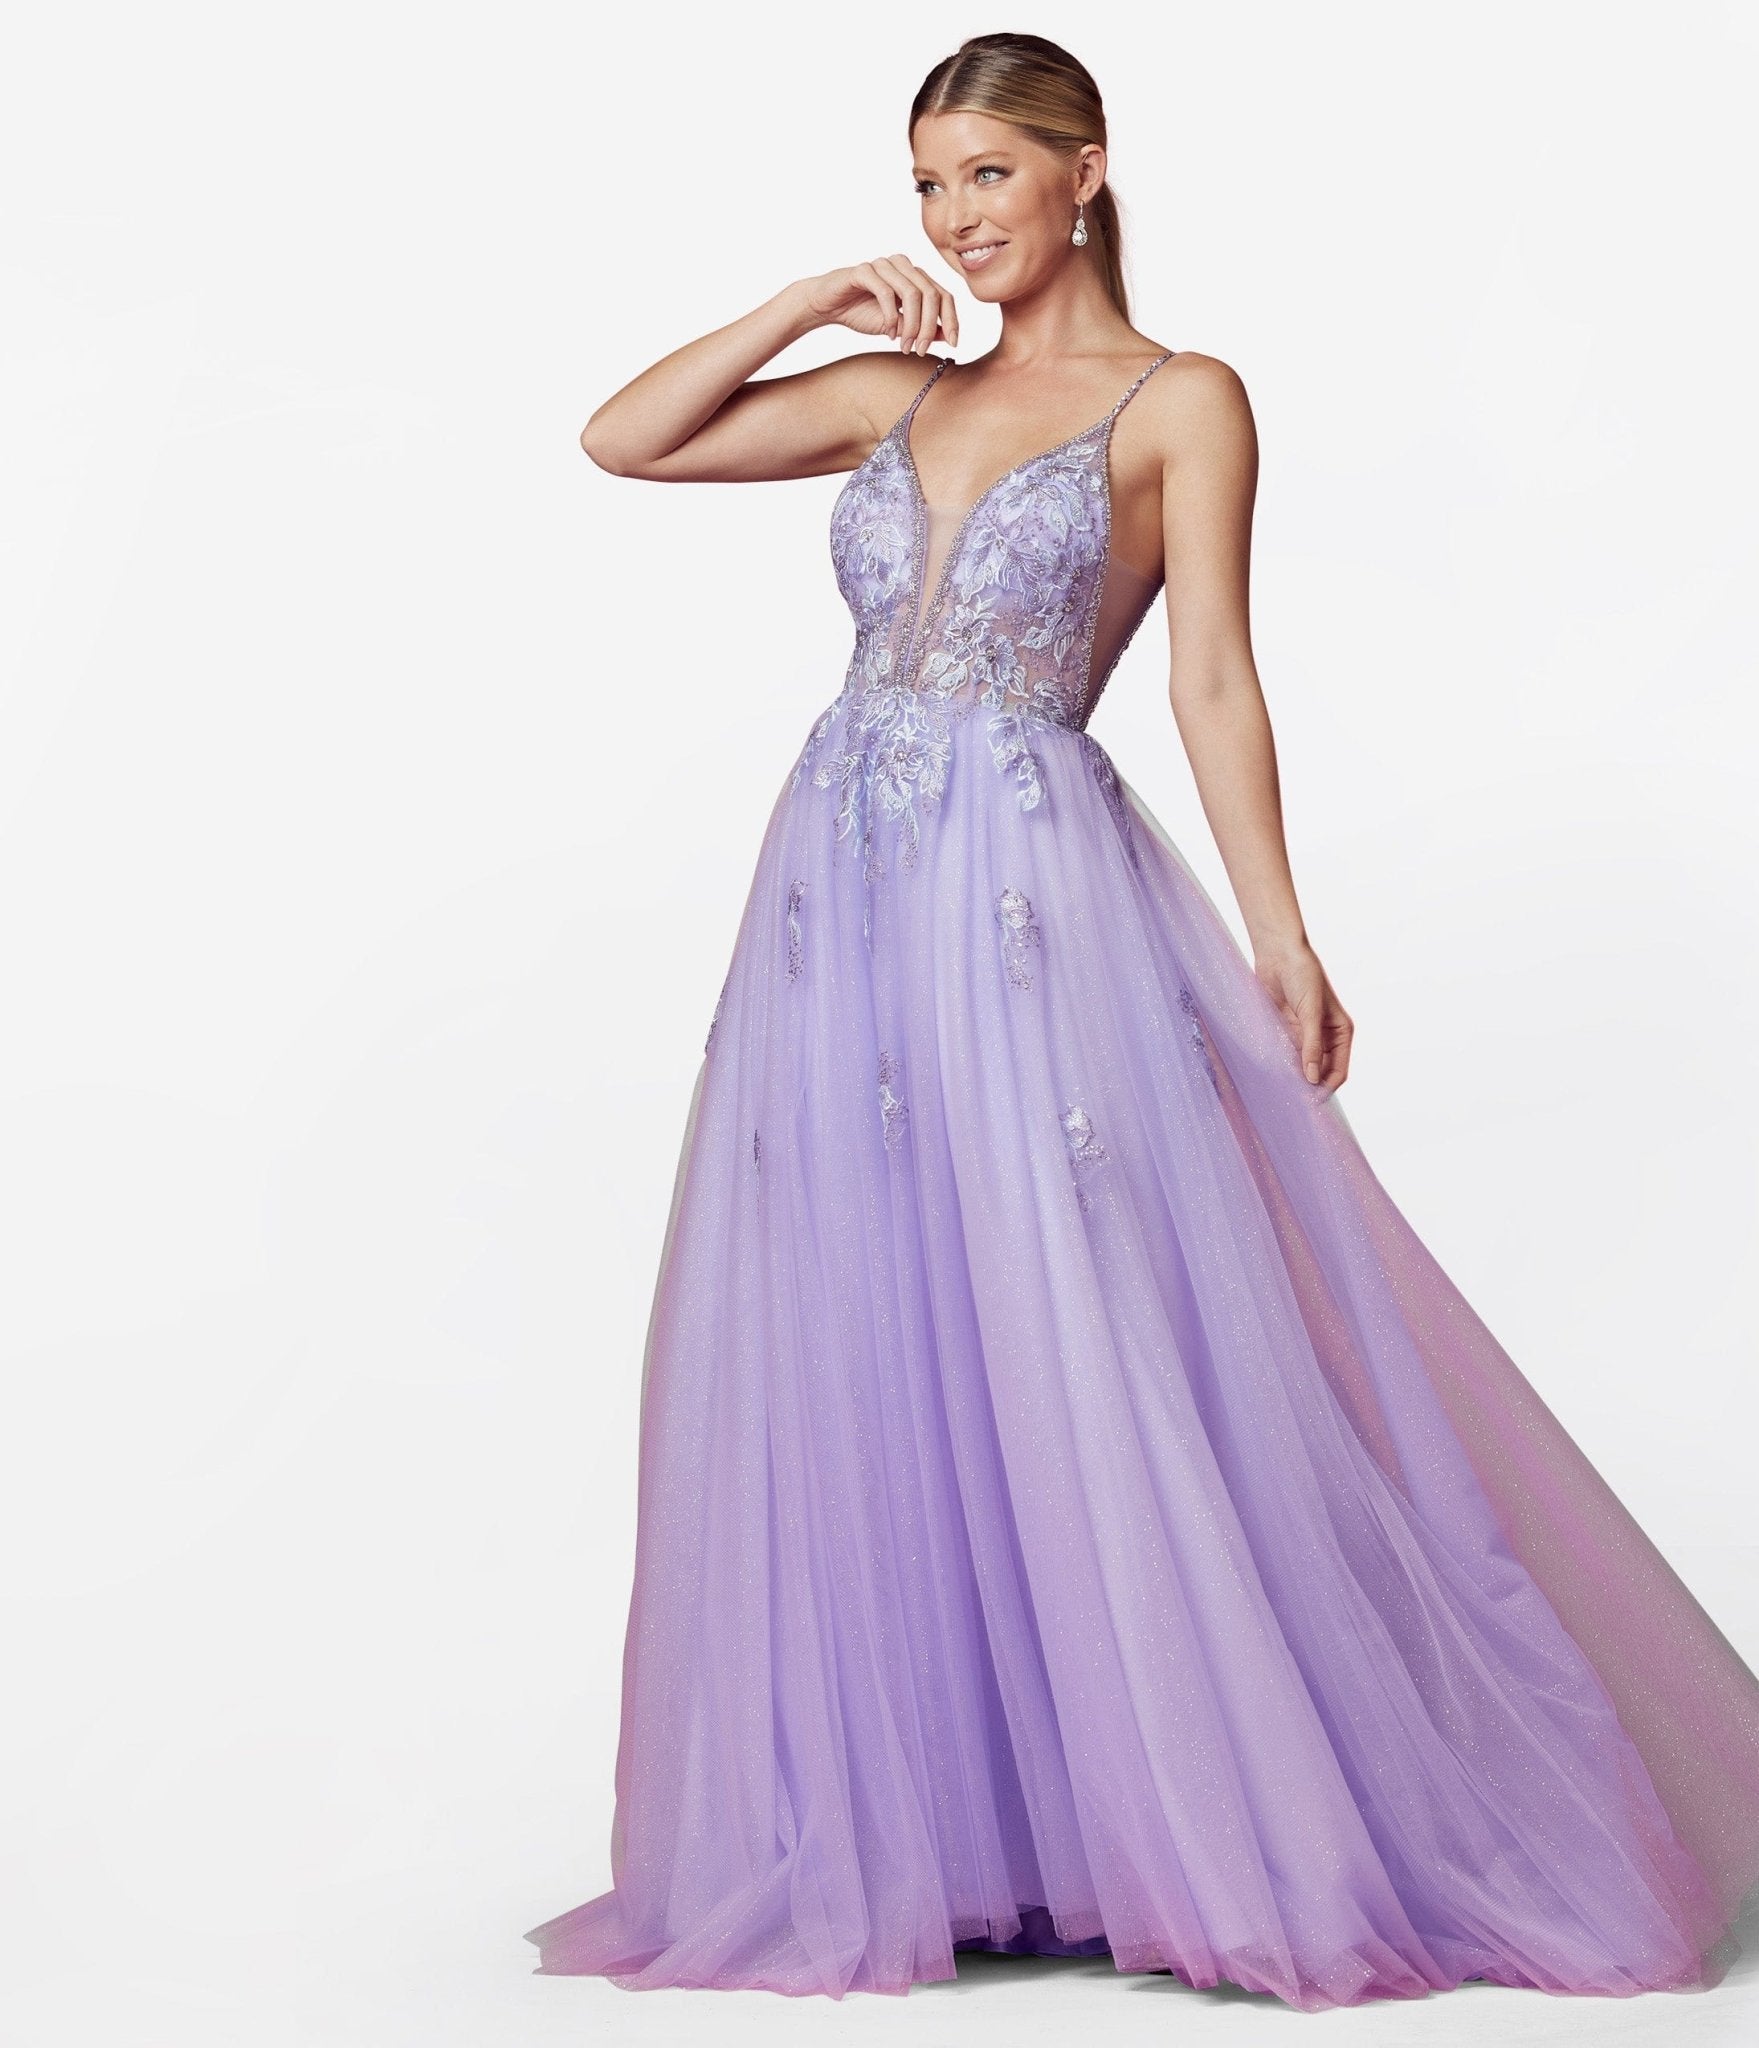 Lilac A-line Prom Gown in style CD970 - Prom-Avenue